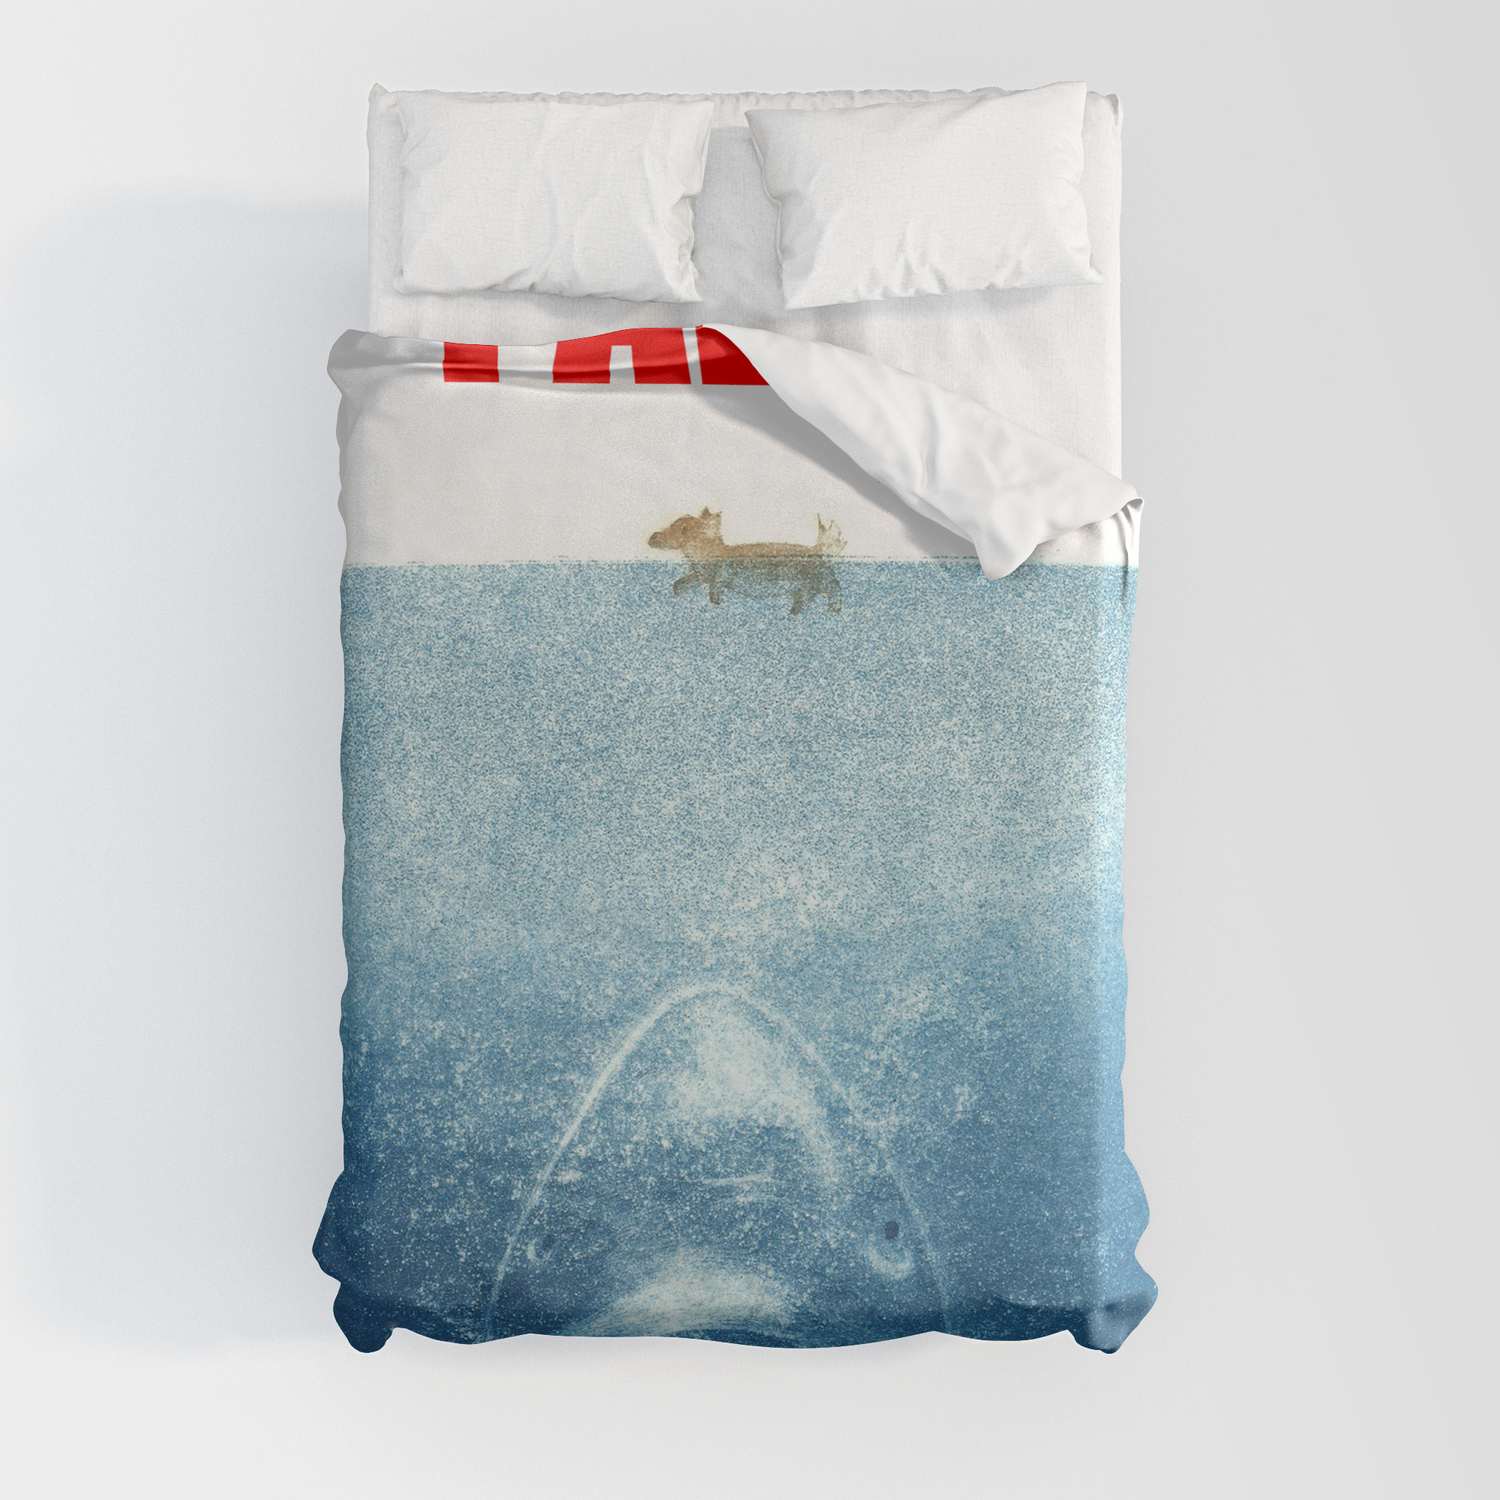 Paws Jaws Parody Duvet Cover By, Jaws Duvet Cover